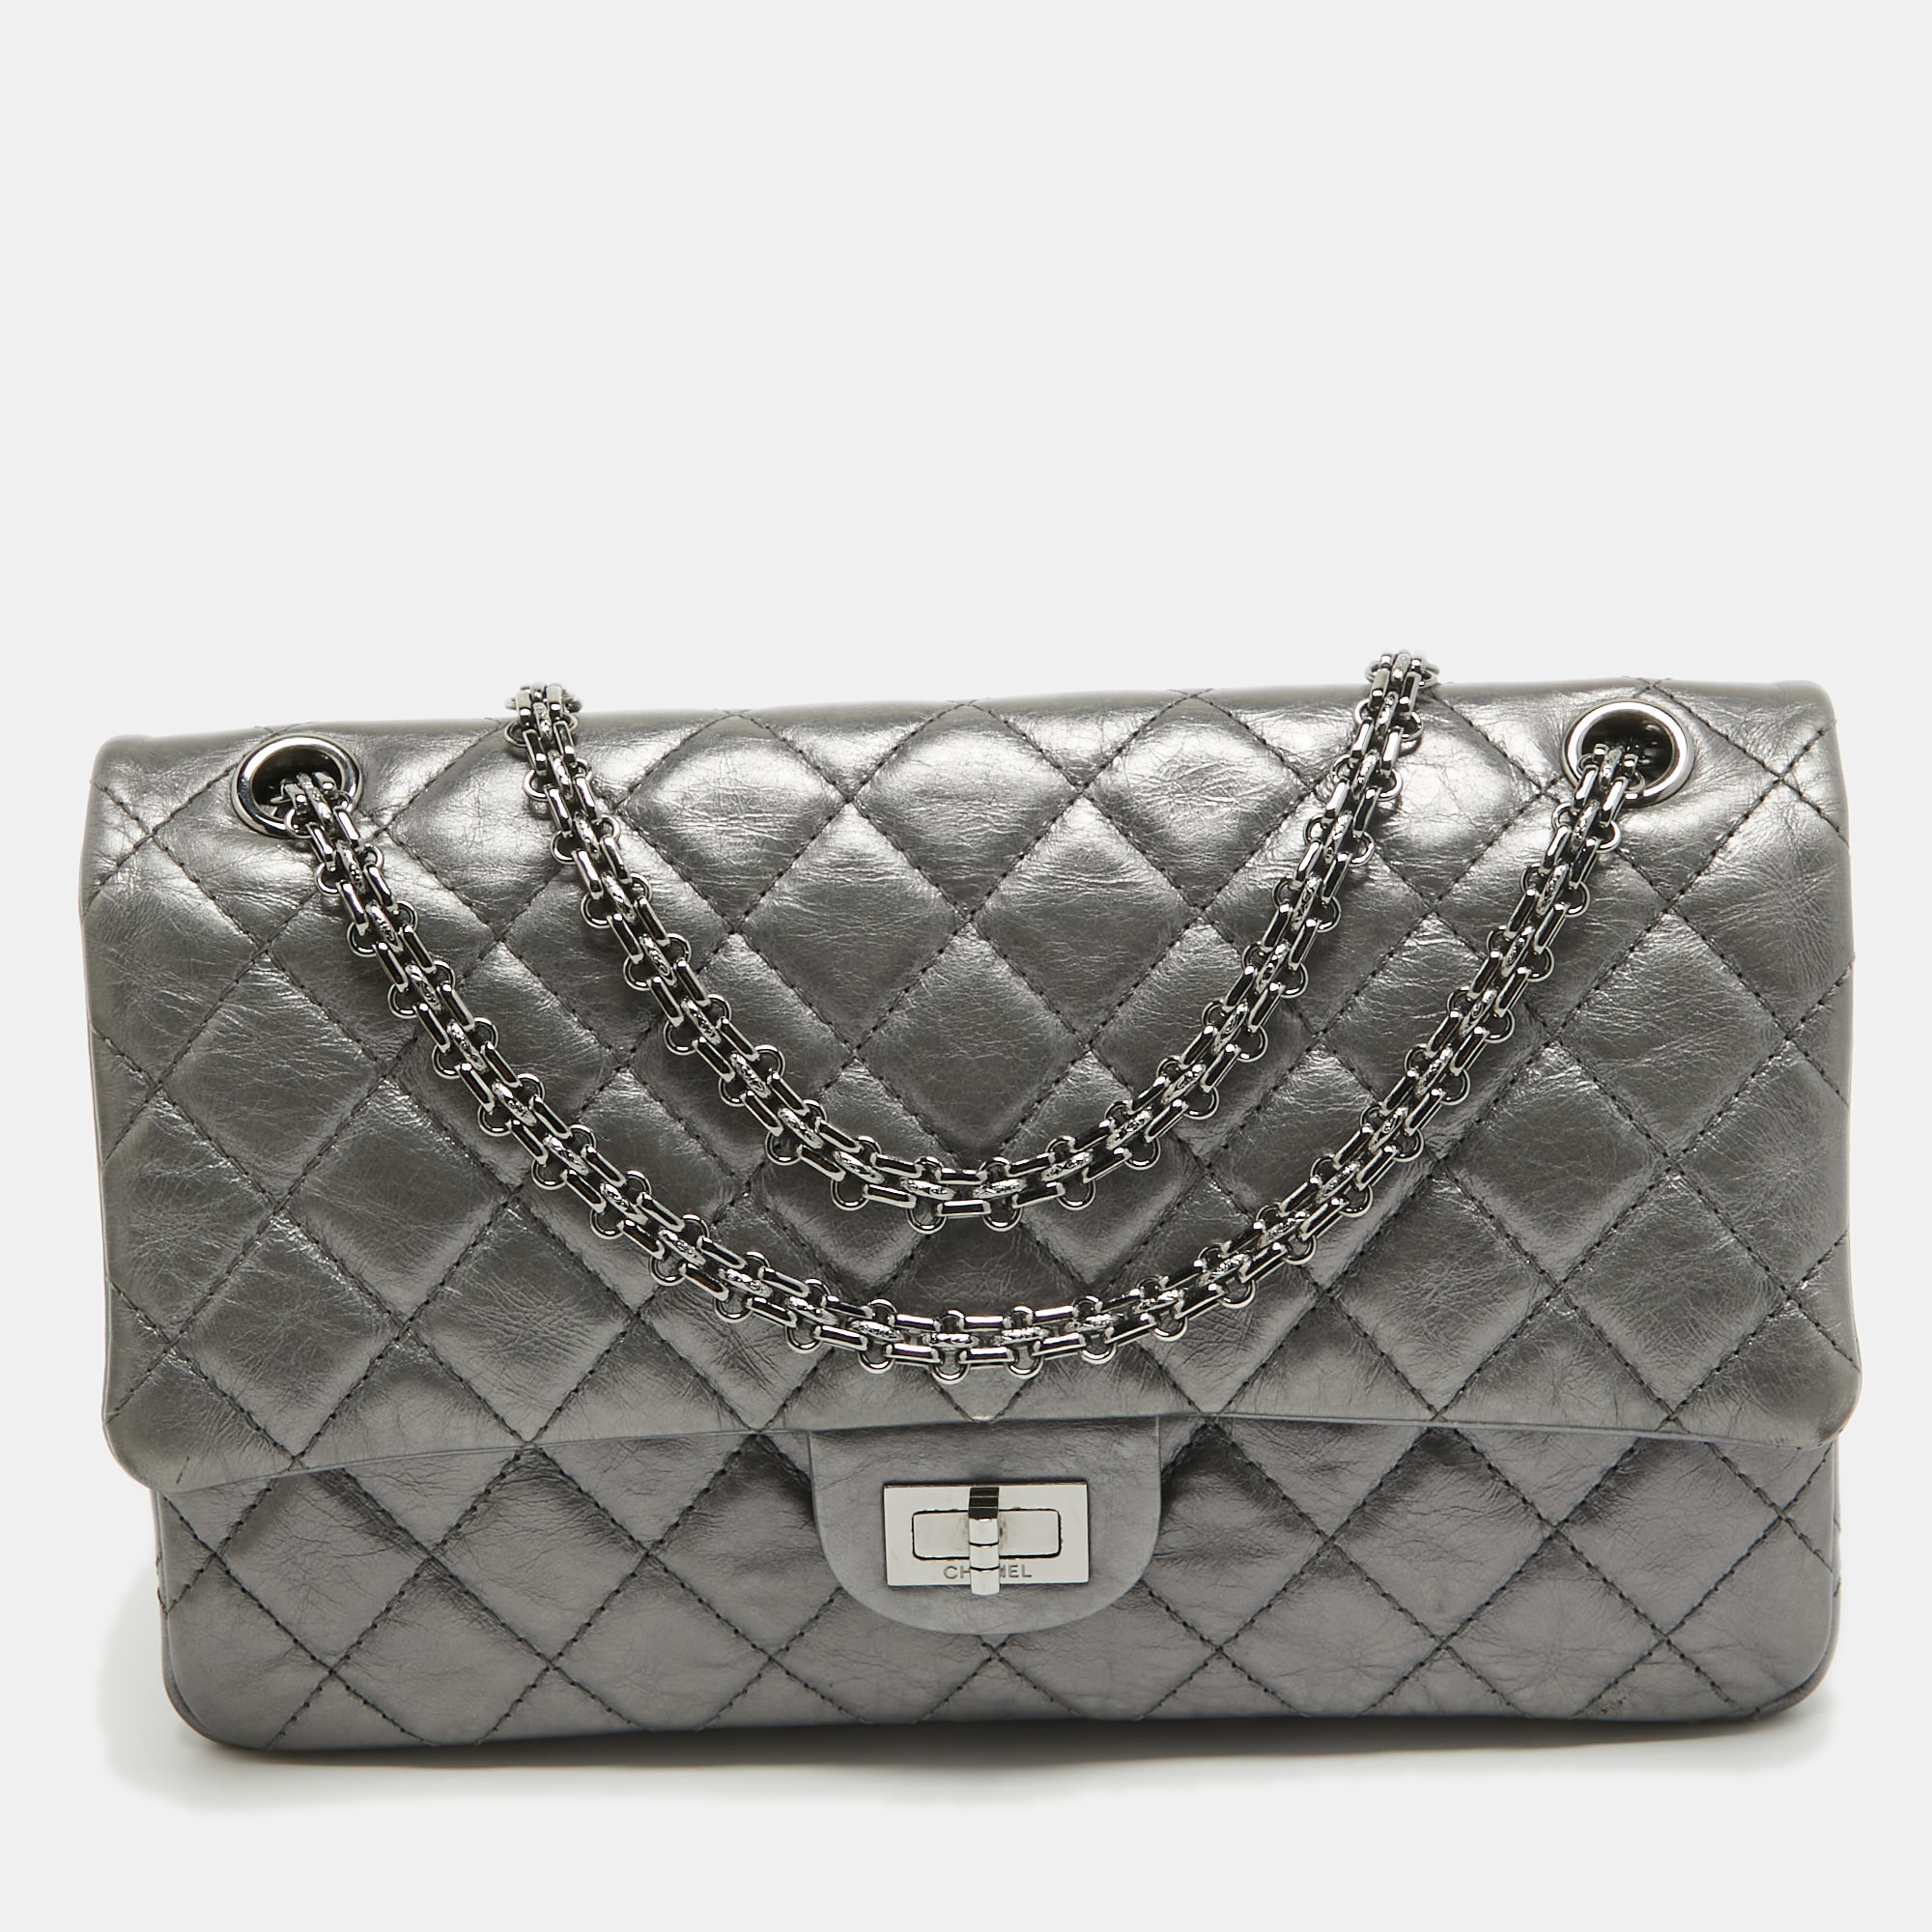 Pre-owned Chanel Metallic Grey Quilted Leather 226 Reissue 2.55 Flap Bag